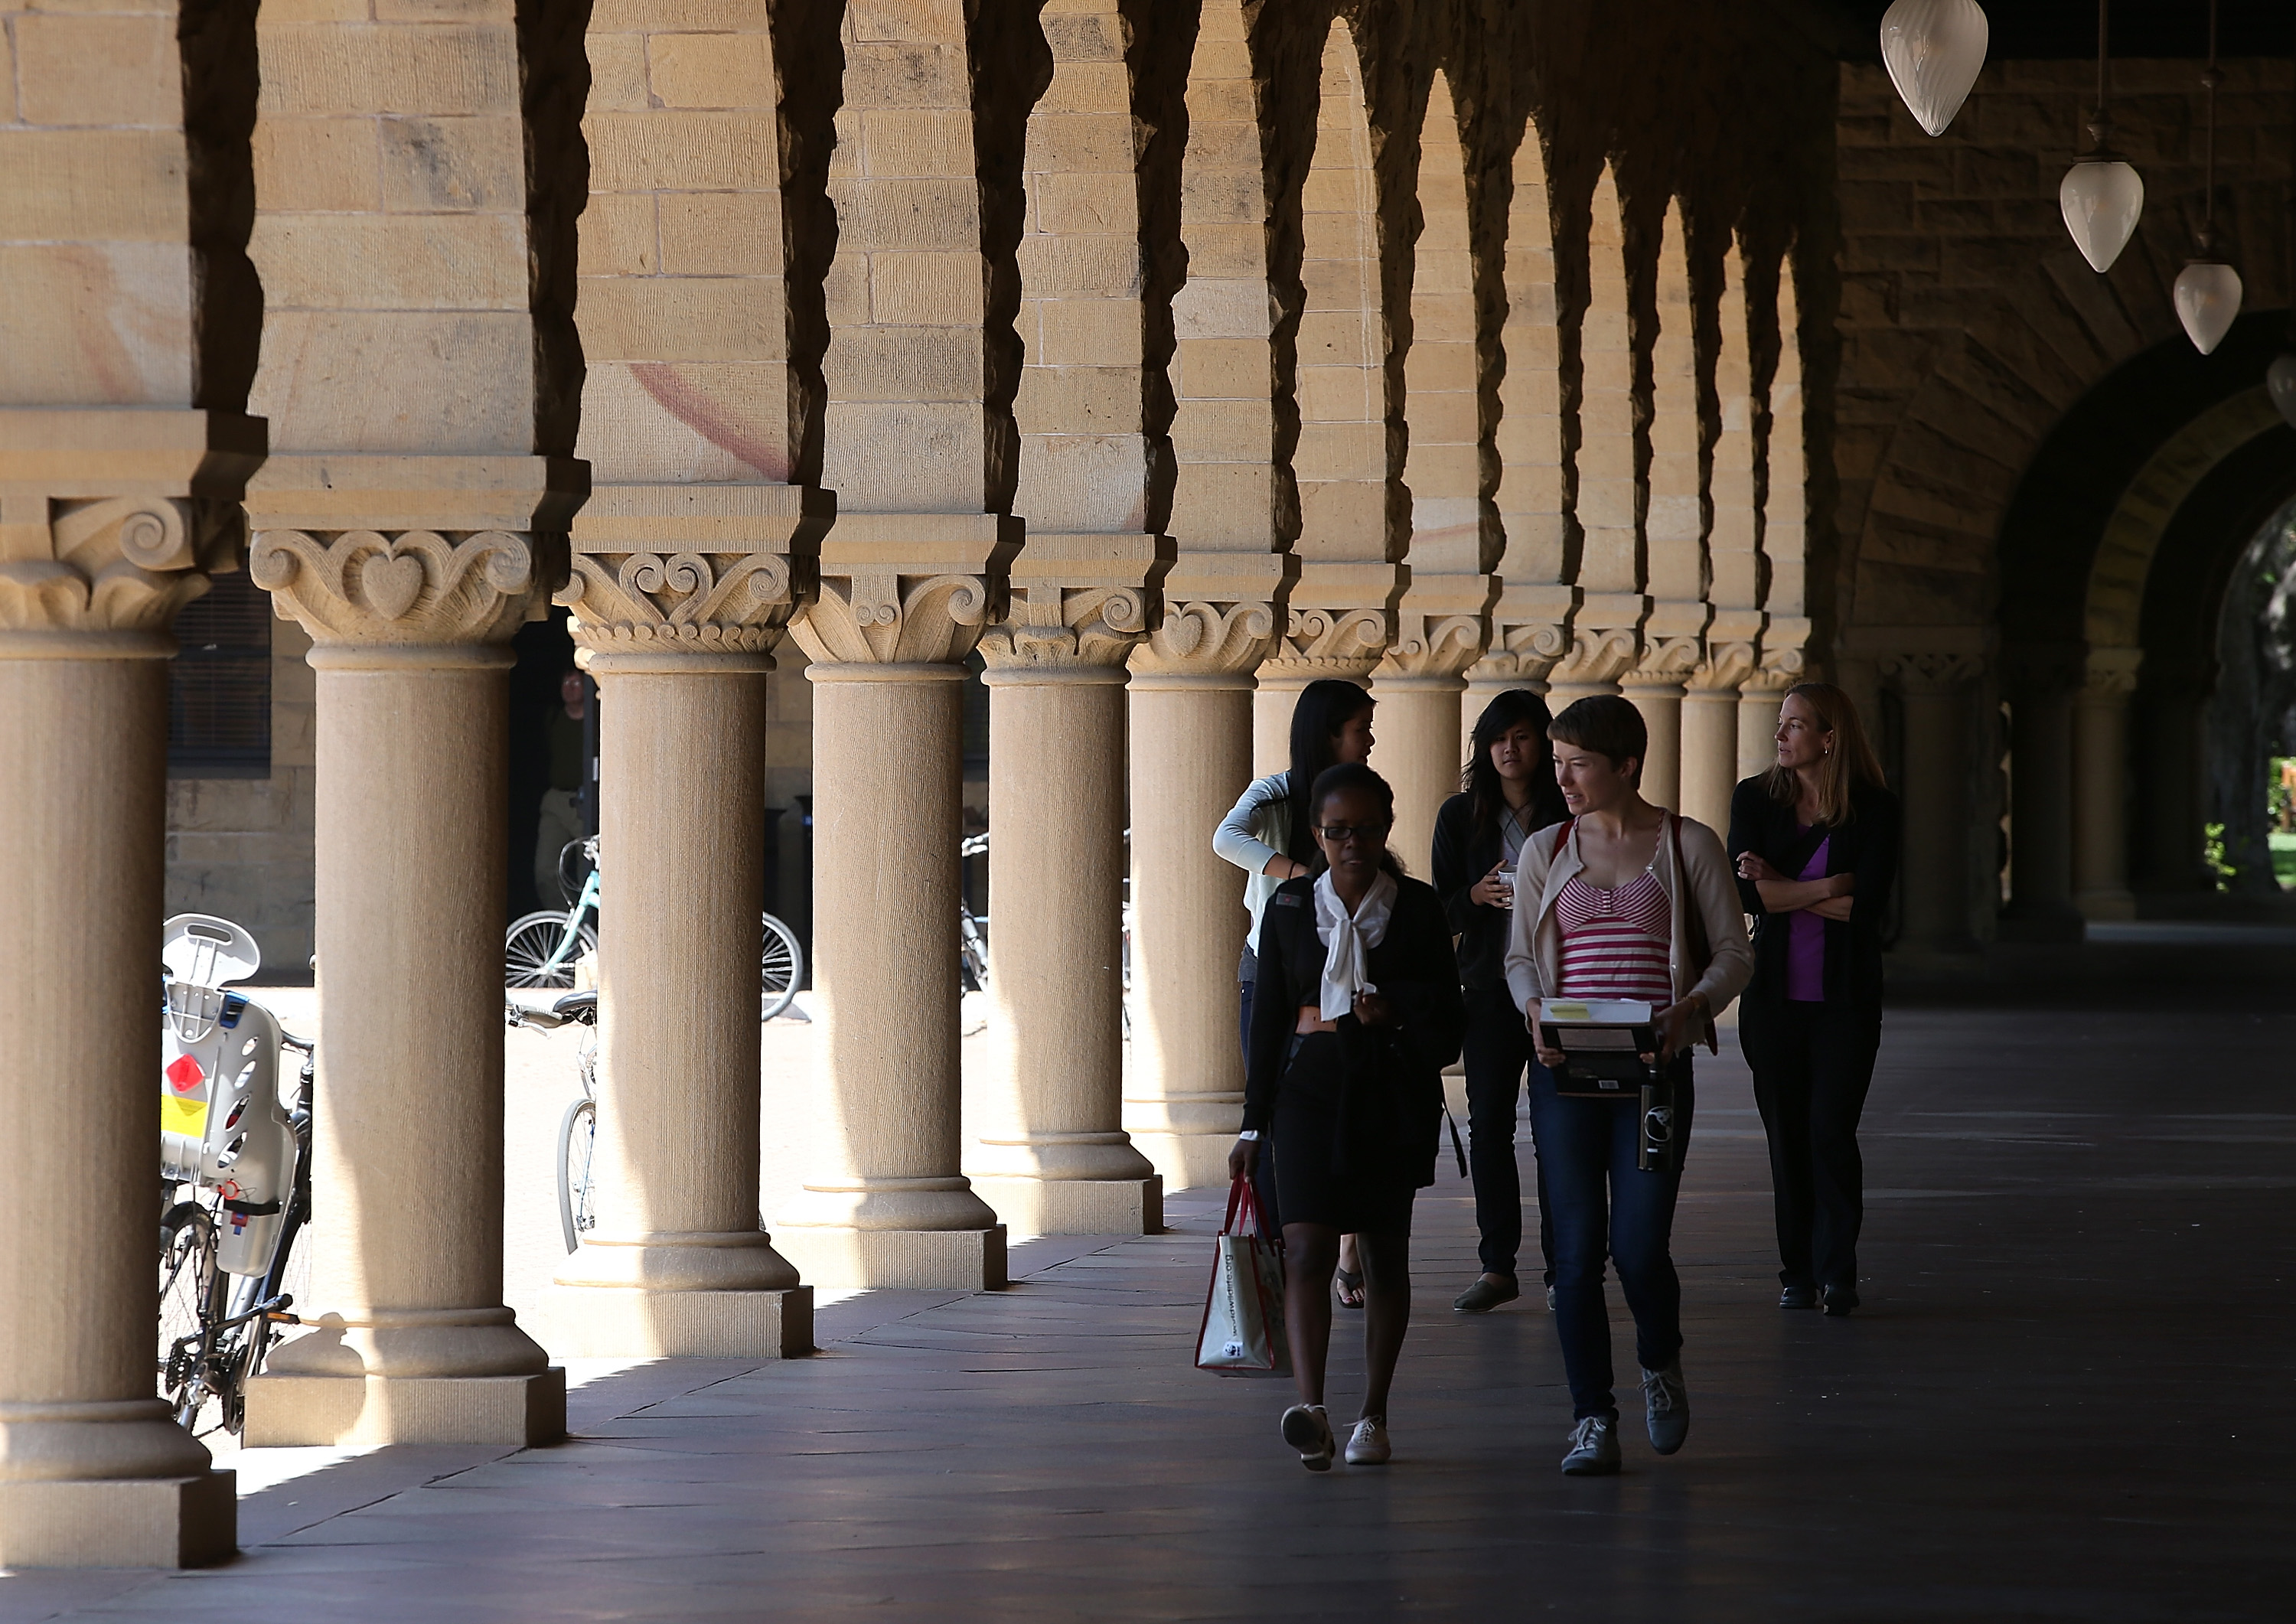 People walk through the Stanford University campus on May 22, 2014 in Stanford, California. (Justin Sullivan—Getty Images)